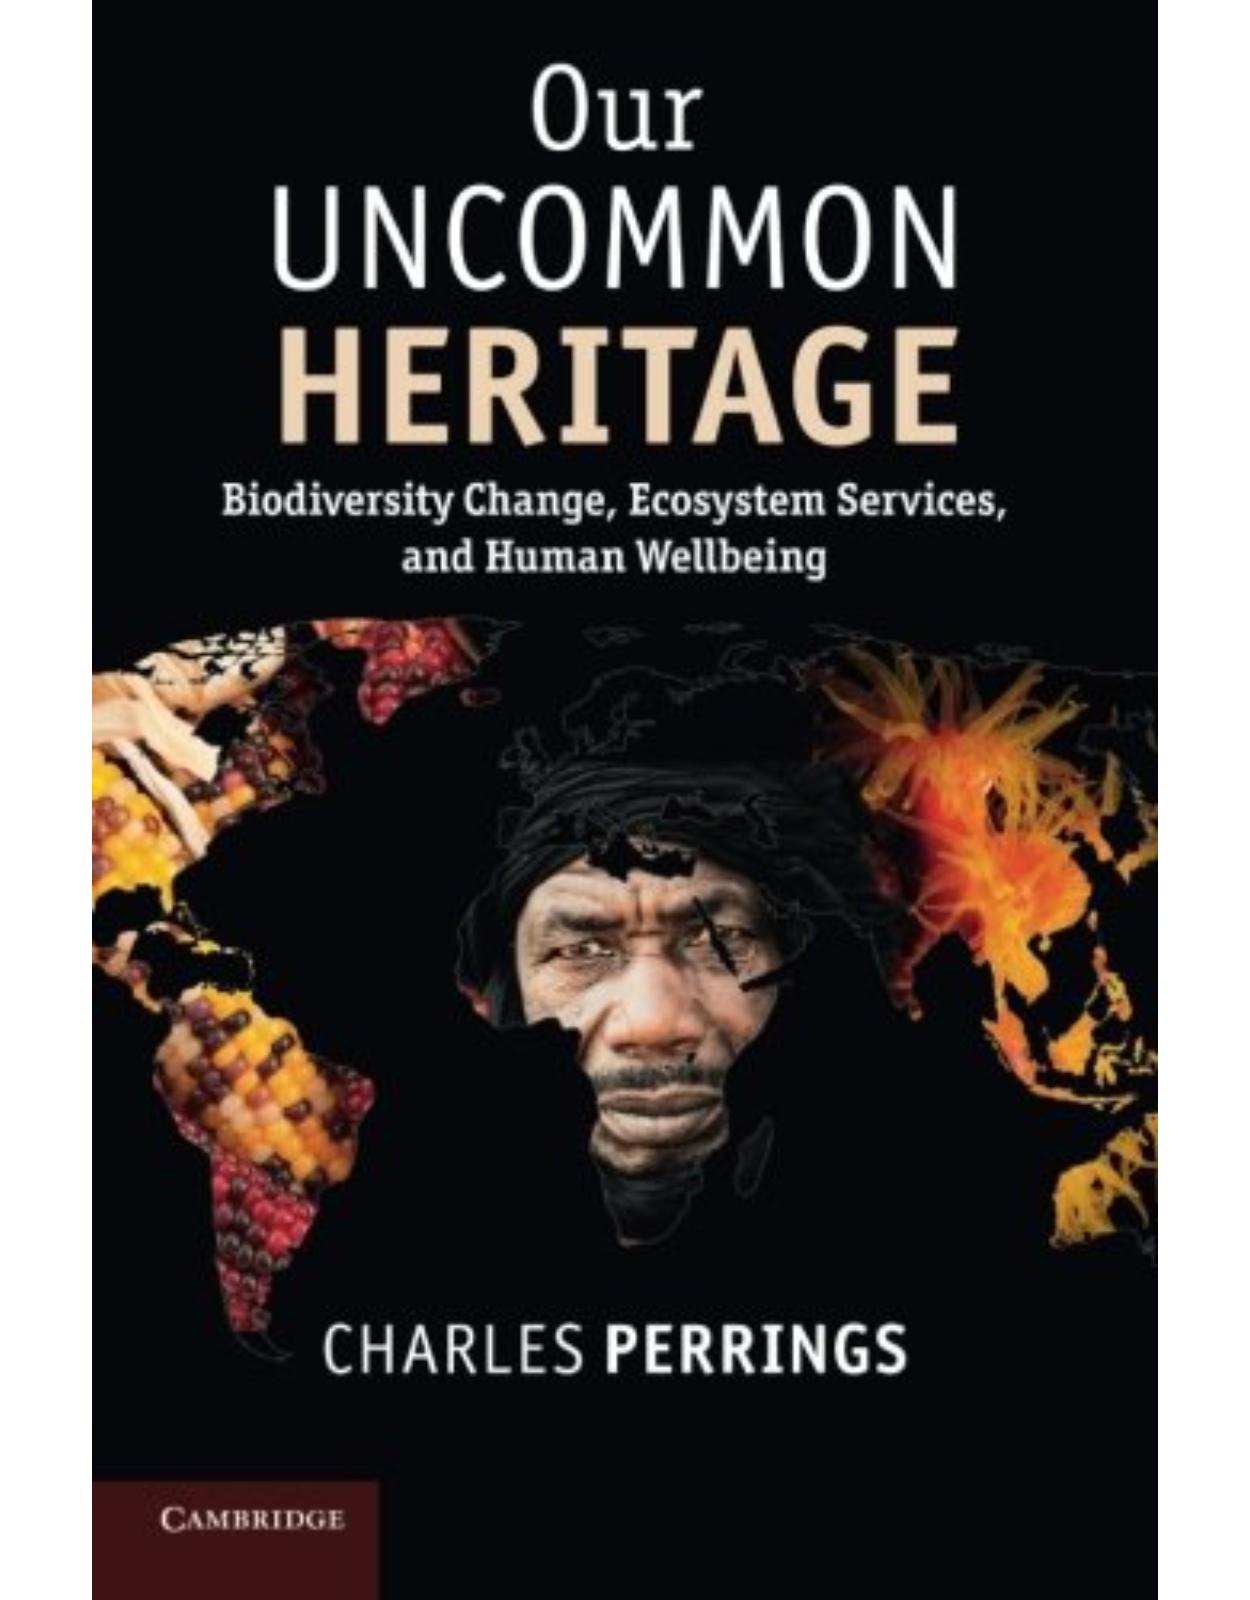 Our Uncommon Heritage: Biodiversity Change, Ecosystem Services, and Human Wellbeing